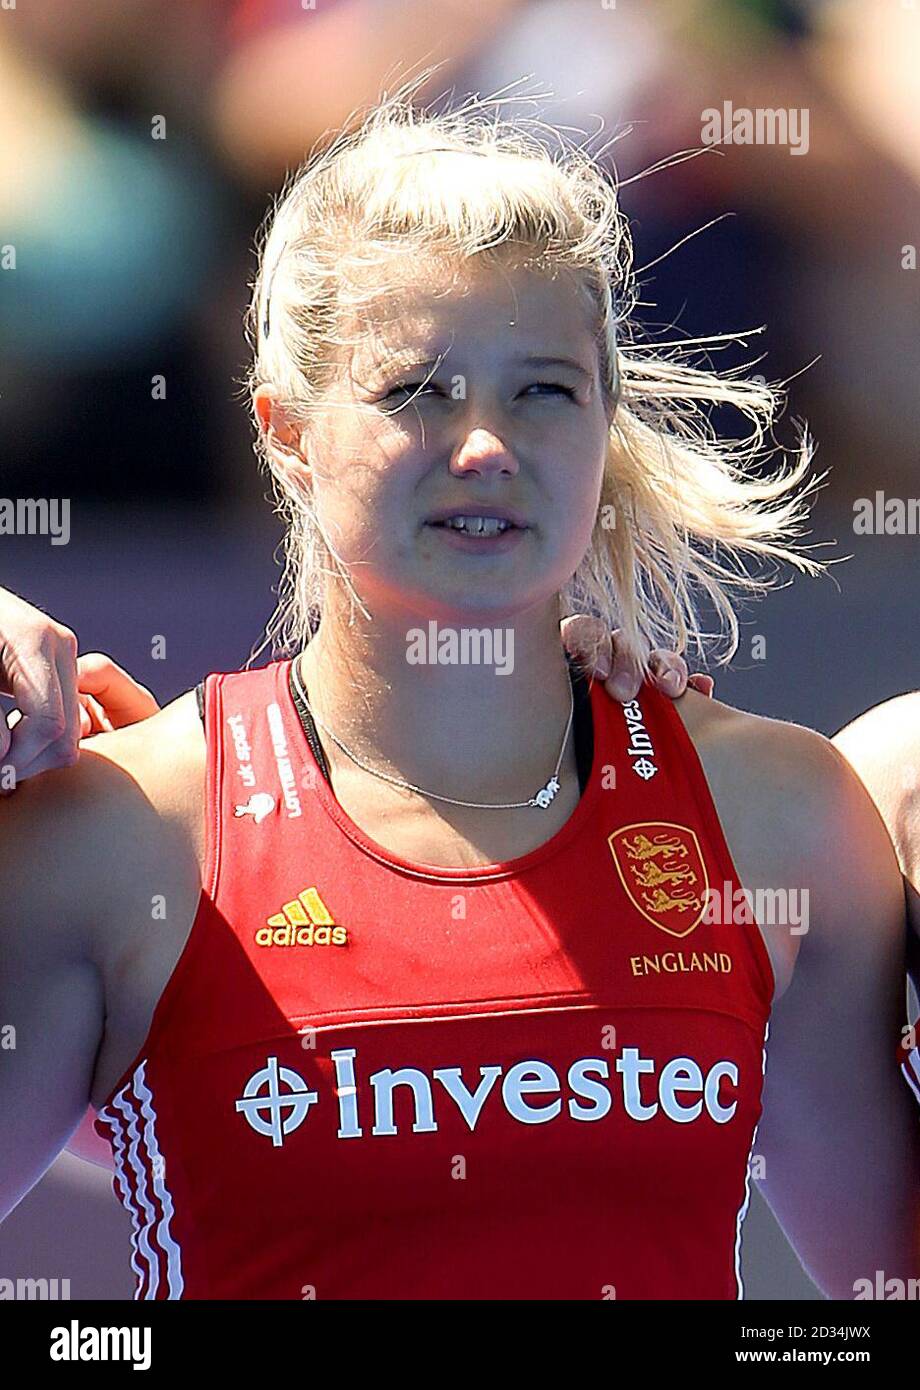 England's Sophie Bray during the Investec International match at Lee Valley Hockey Centre, London. Stock Photo